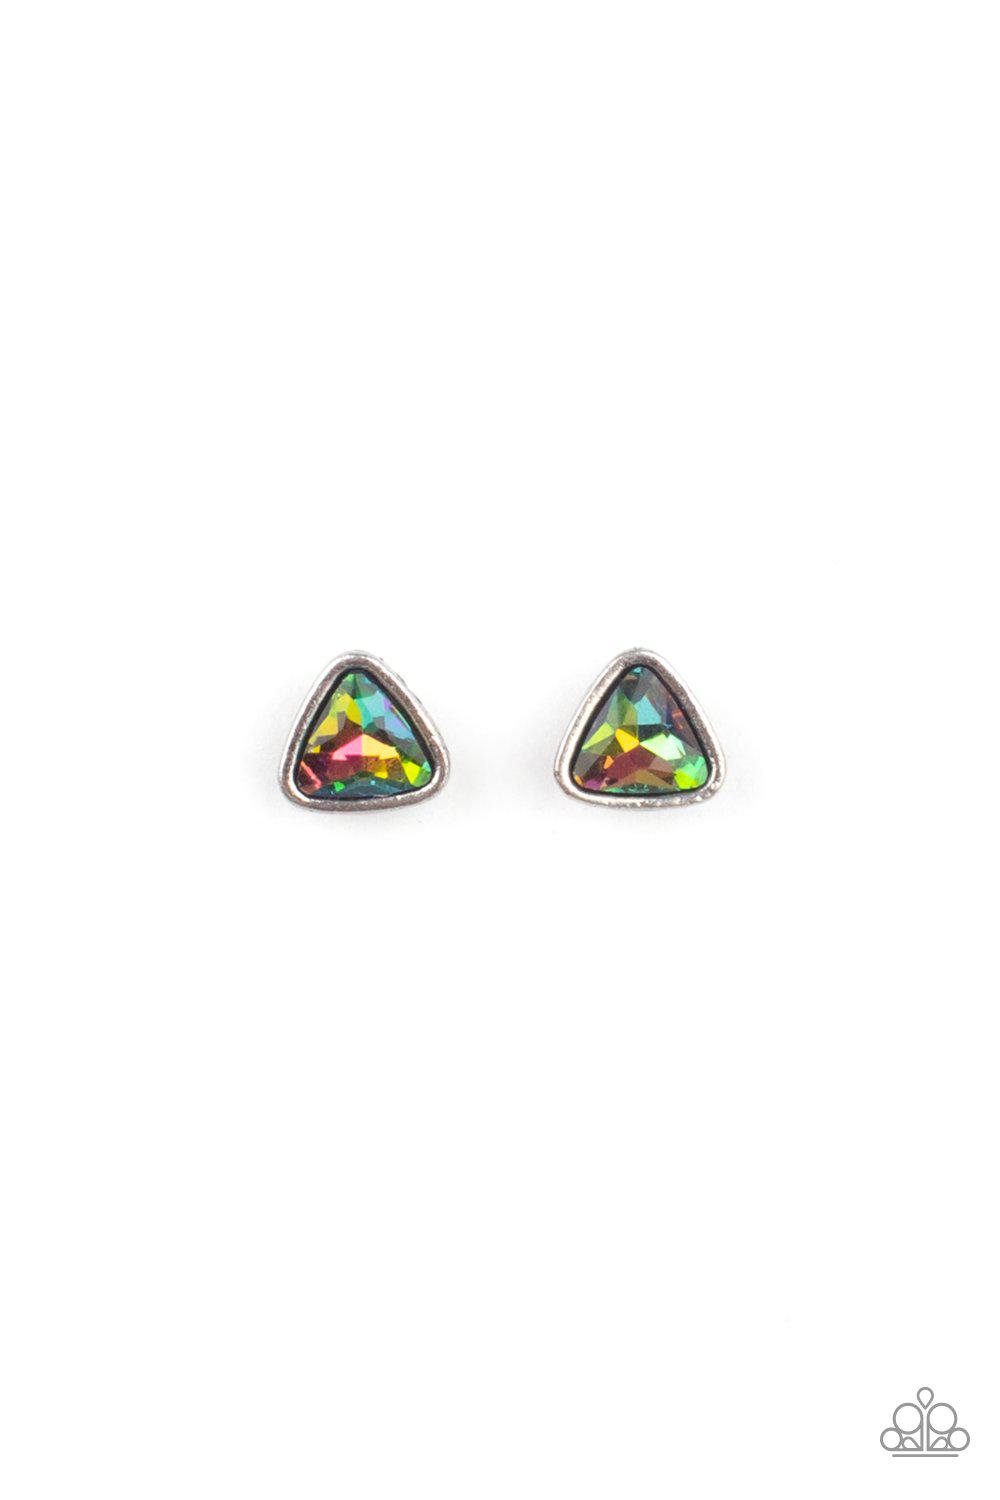 Starlet Shimmer Children&#39;s &quot;Oil Spill&quot; Rhinestone Post Earrings v3 - Paparazzi Accessories (set of 10 pairs)- lightbox - CarasShop.com - $5 Jewelry by Cara Jewels